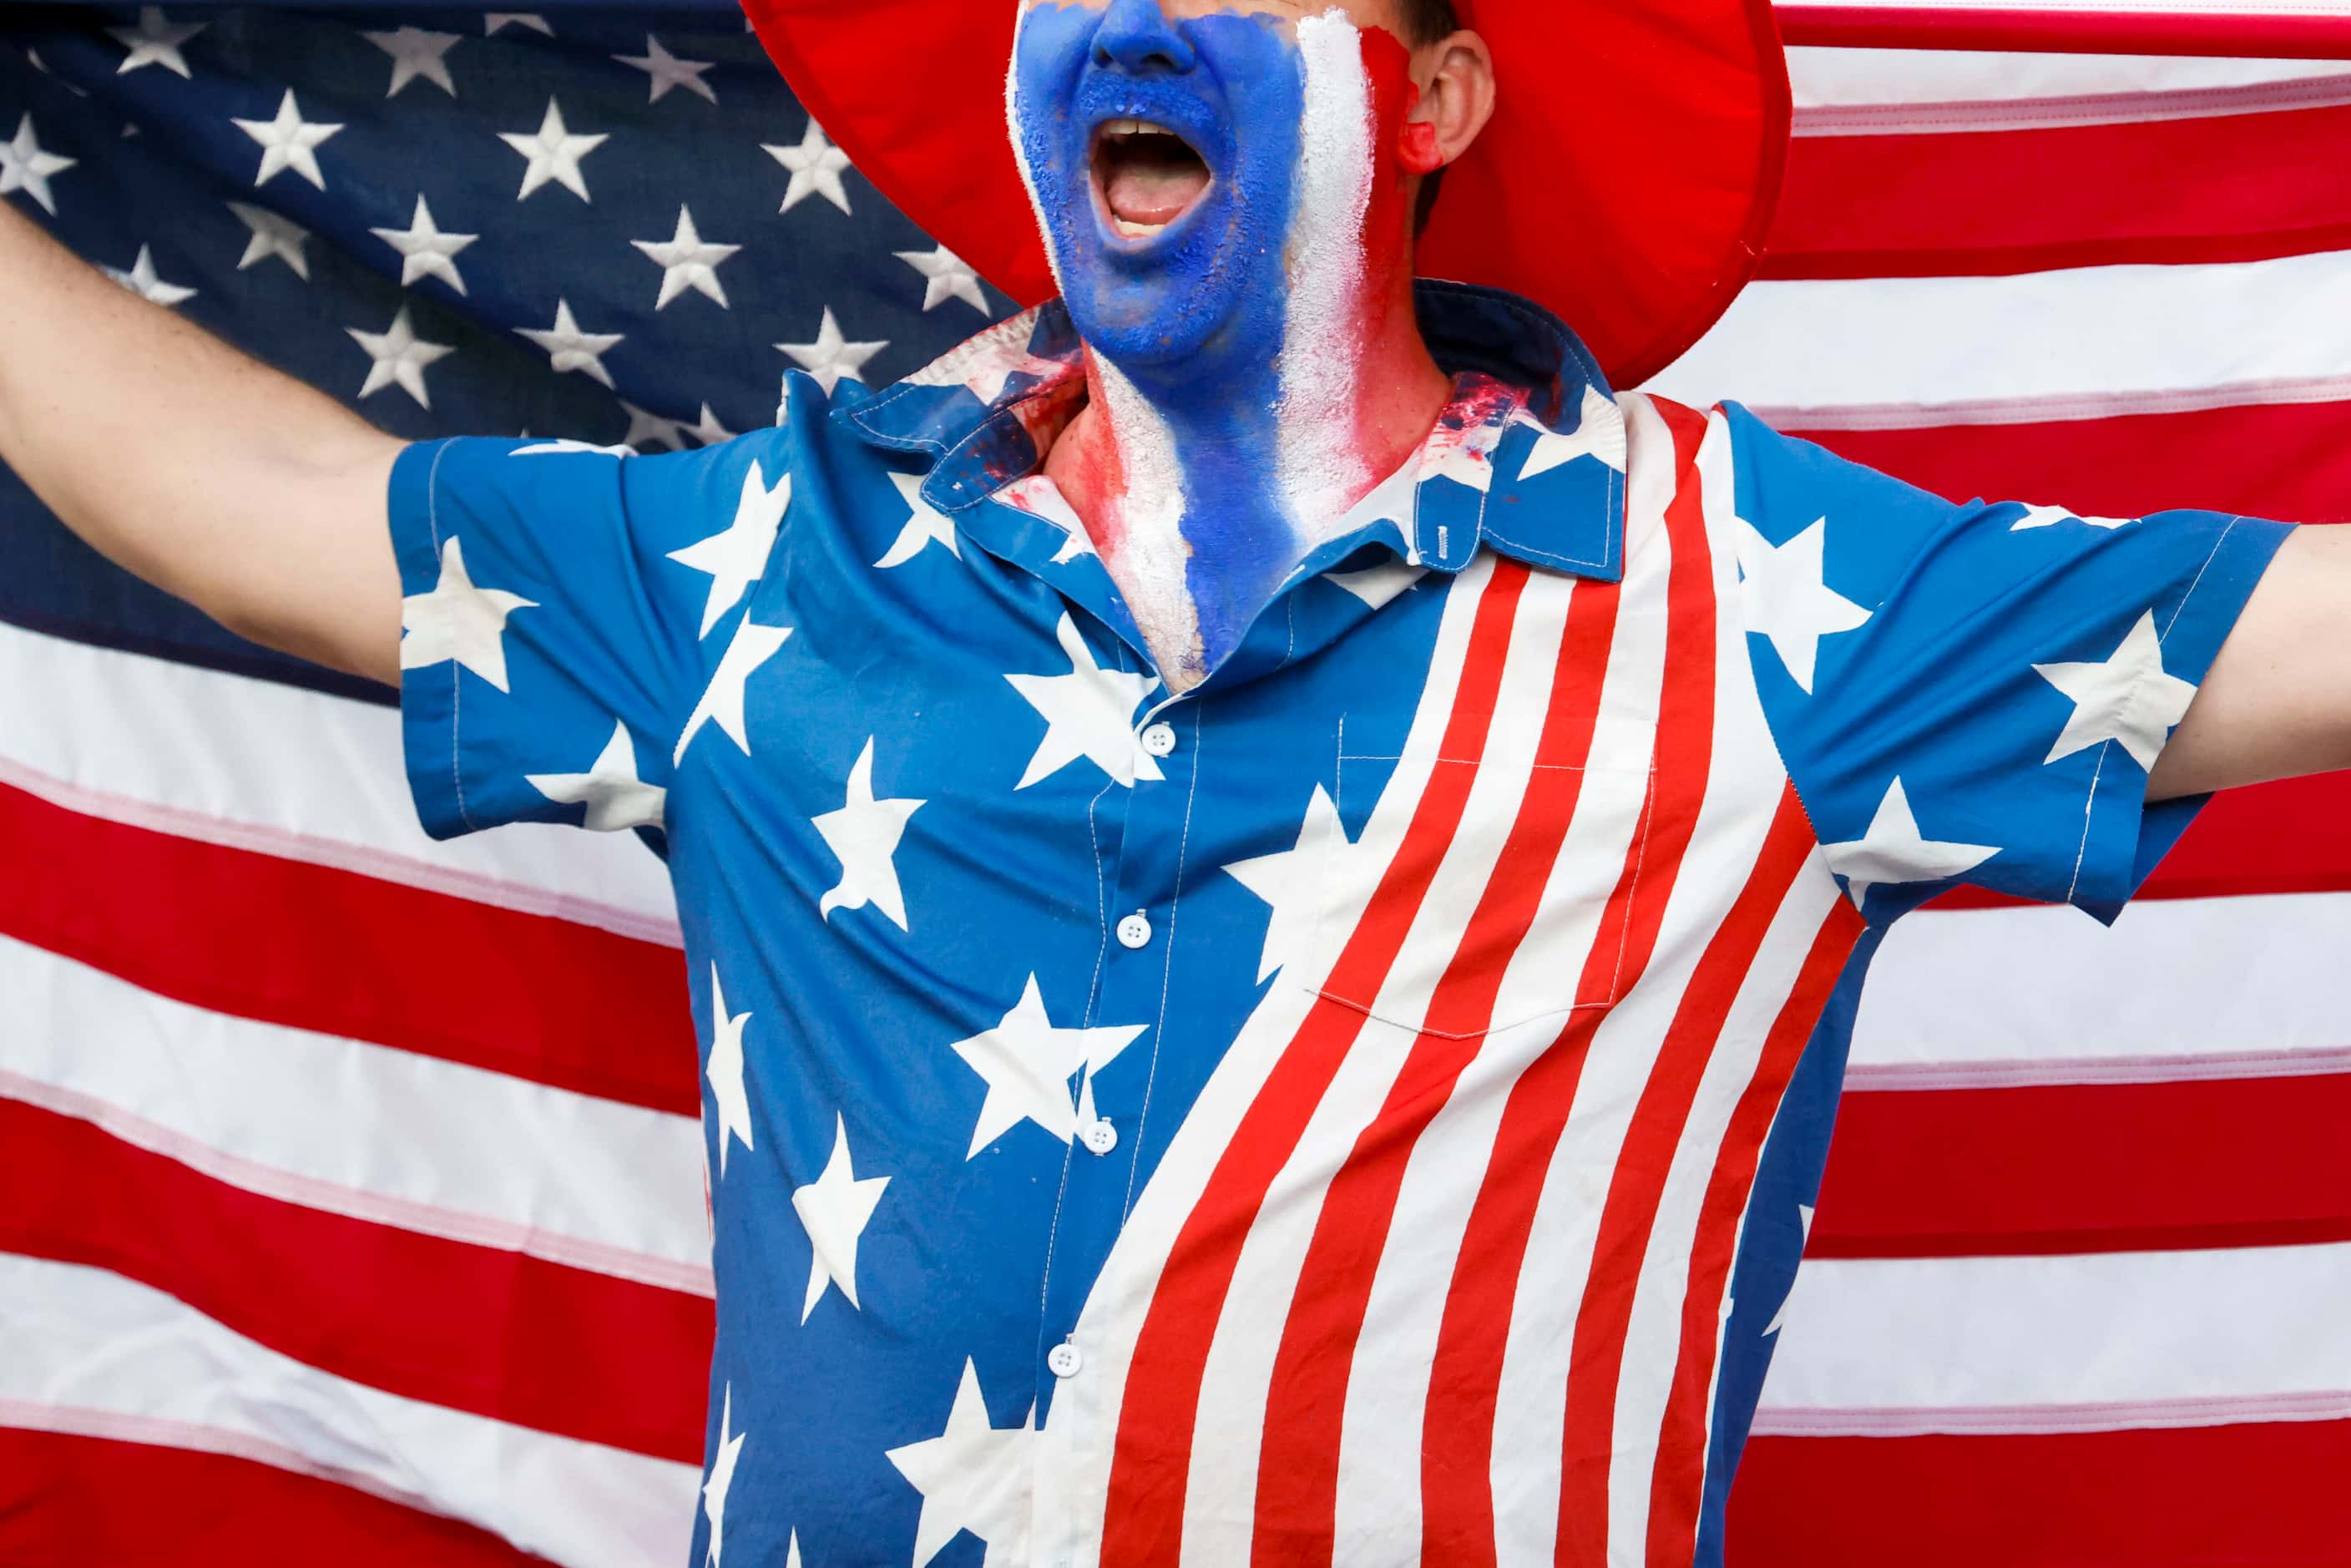 PJ Goedhals, of Houston area, wearing U.S themed outfit cheers during the men's T20 World...